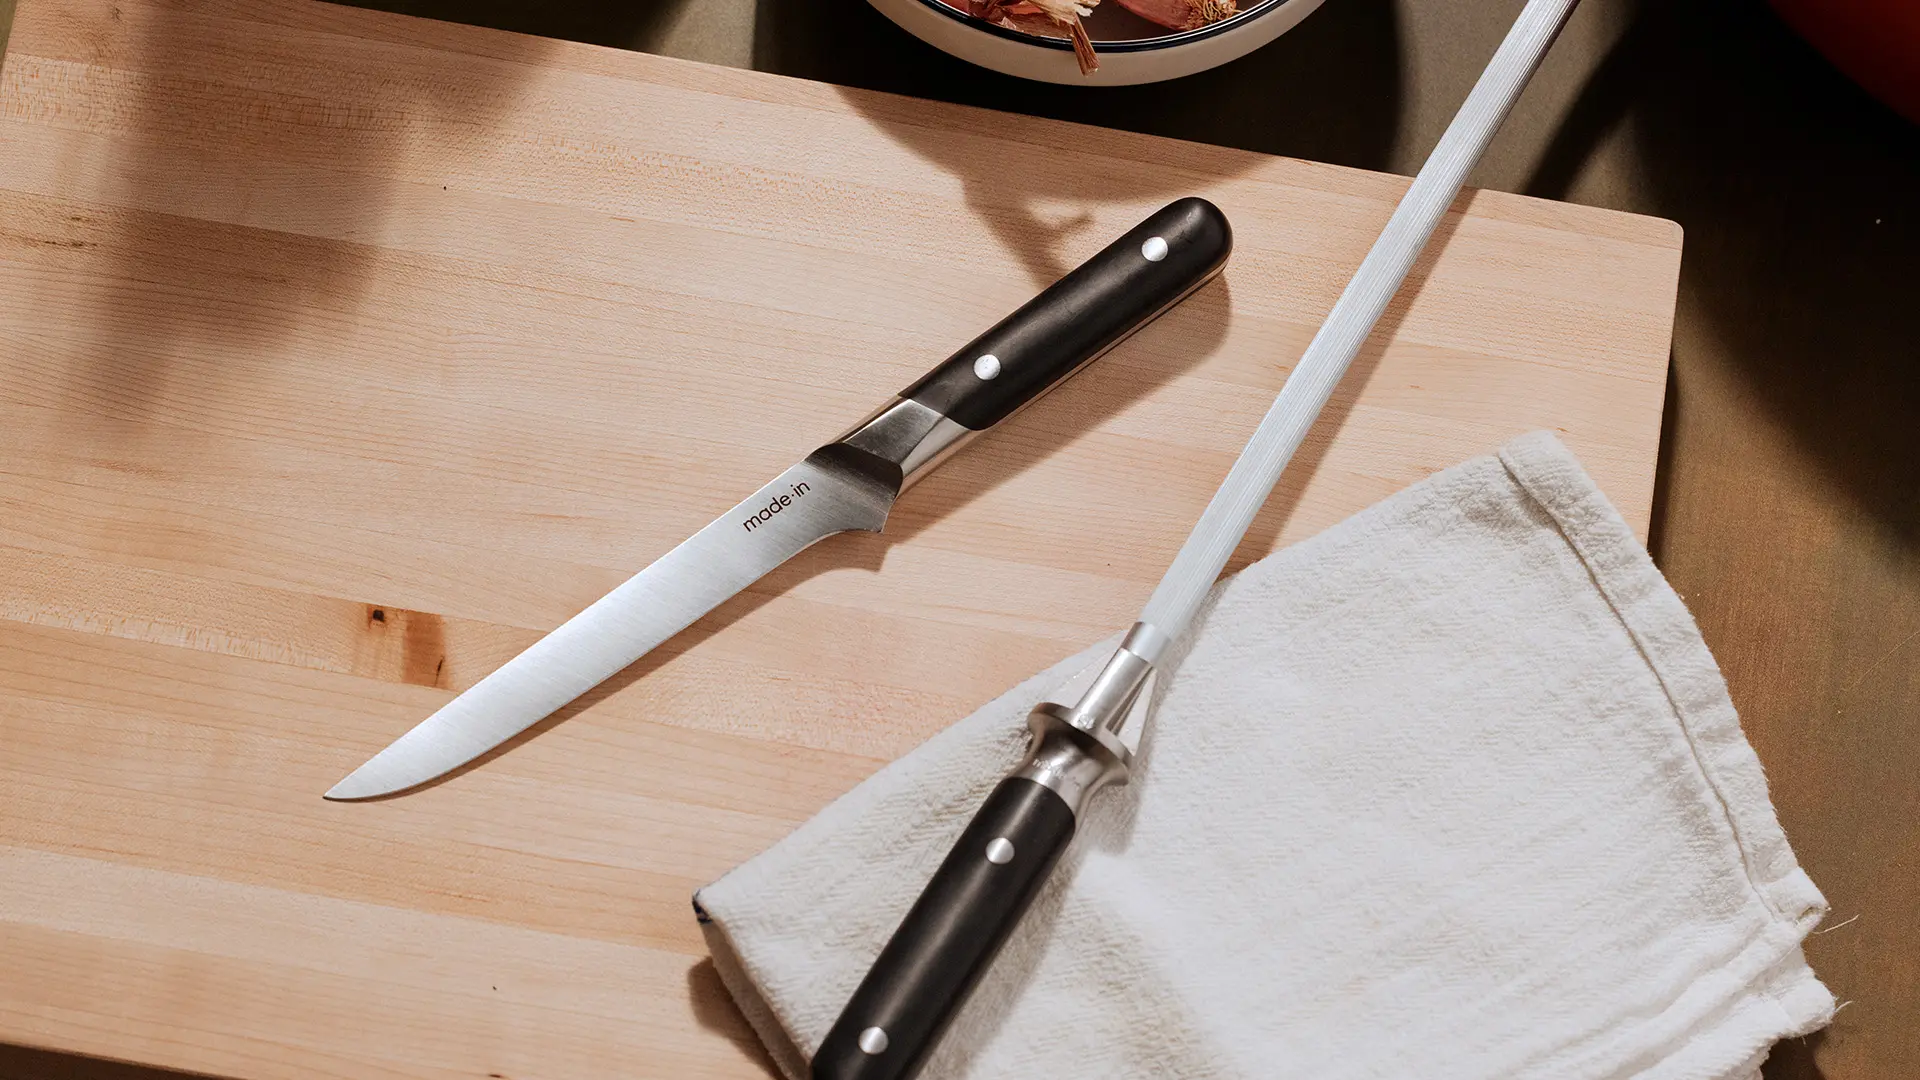 A knife and a honing steel lie on a wooden cutting board next to a folded white dishcloth.